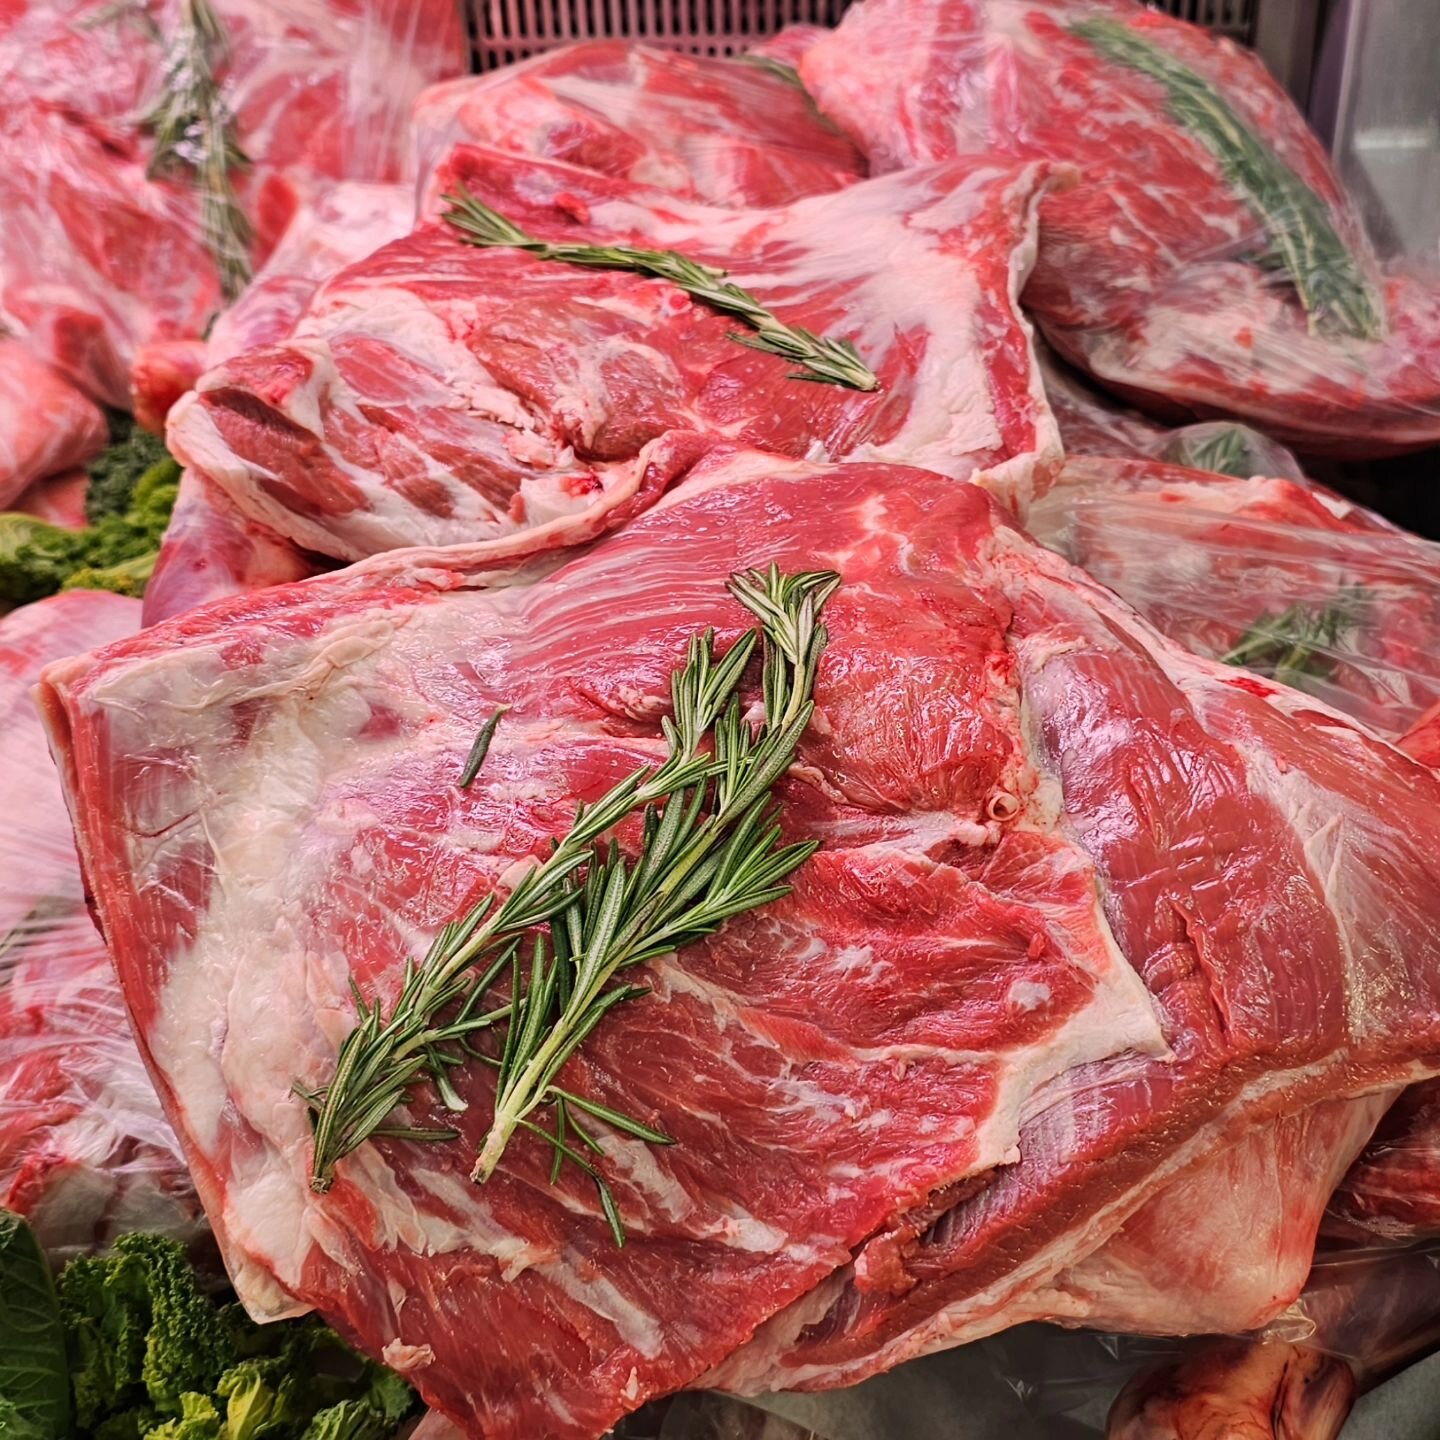 We've got a shop full of lamb right now. Grab it while you can, I have a feeling it won't last long.

#sydenham #sydenhammums #dulwichmums #crystalpalacemums #nightin #butchers #freerange #fish #fishmongers #shopindependent #shopsmallbusiness #foodie